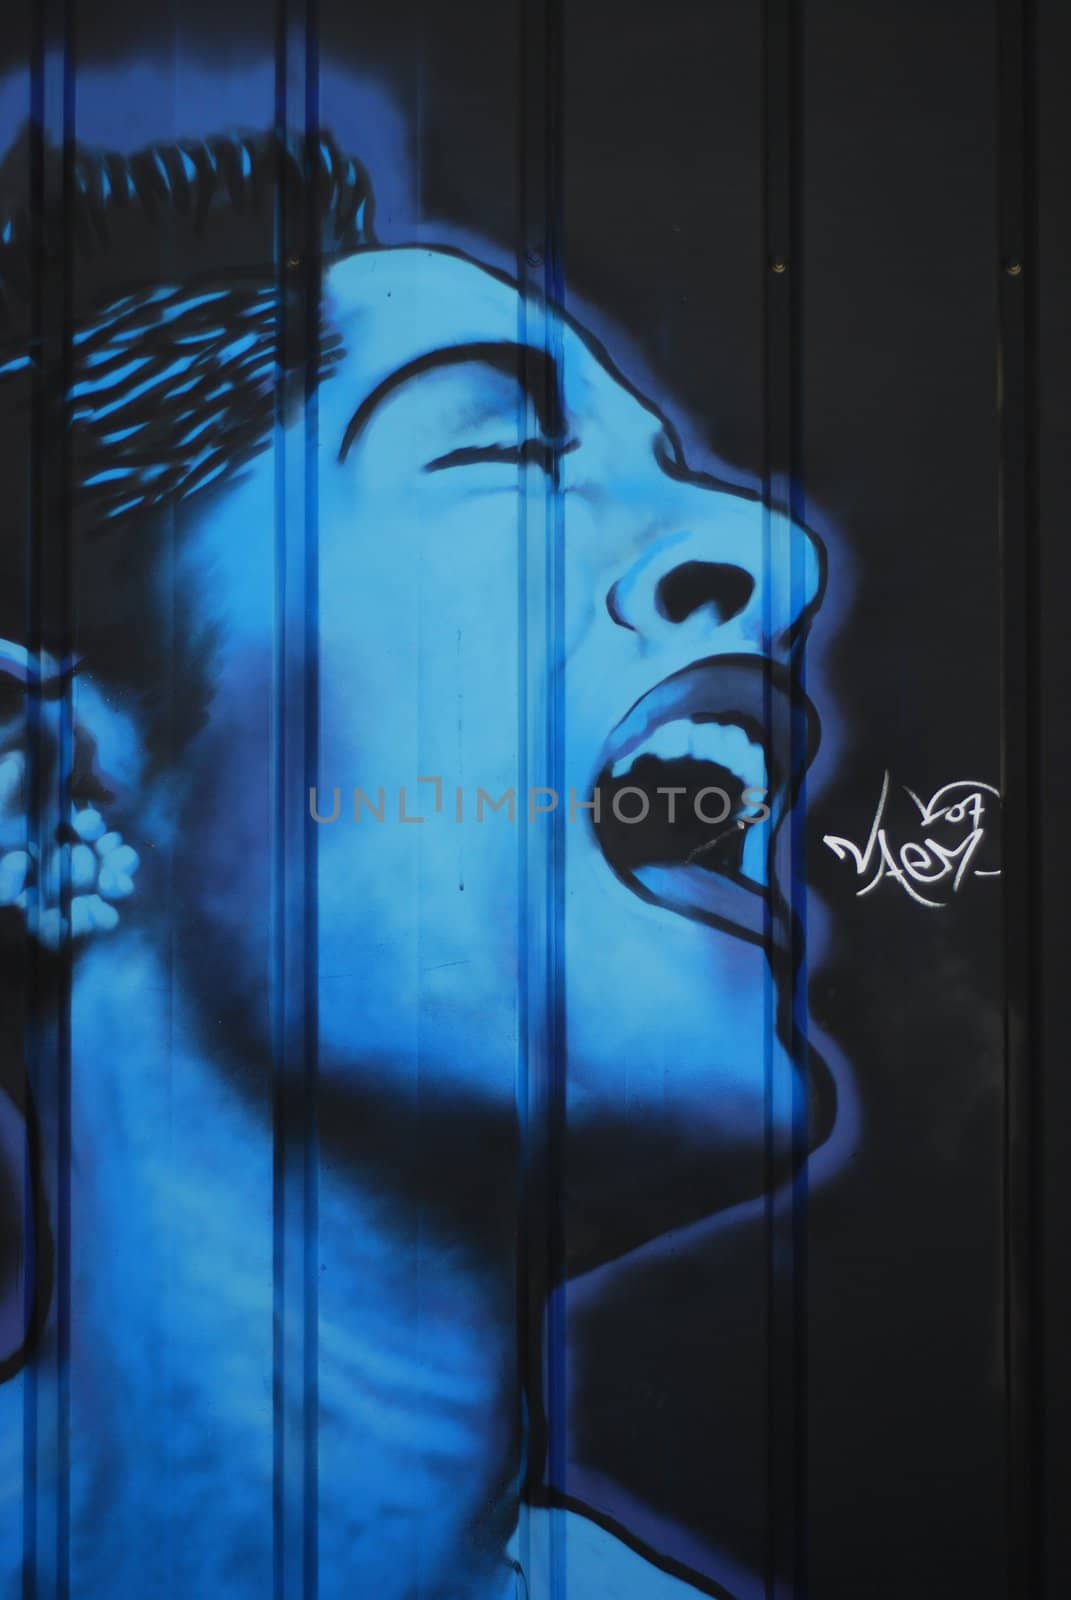 Billie Holiday by microscopicmuse